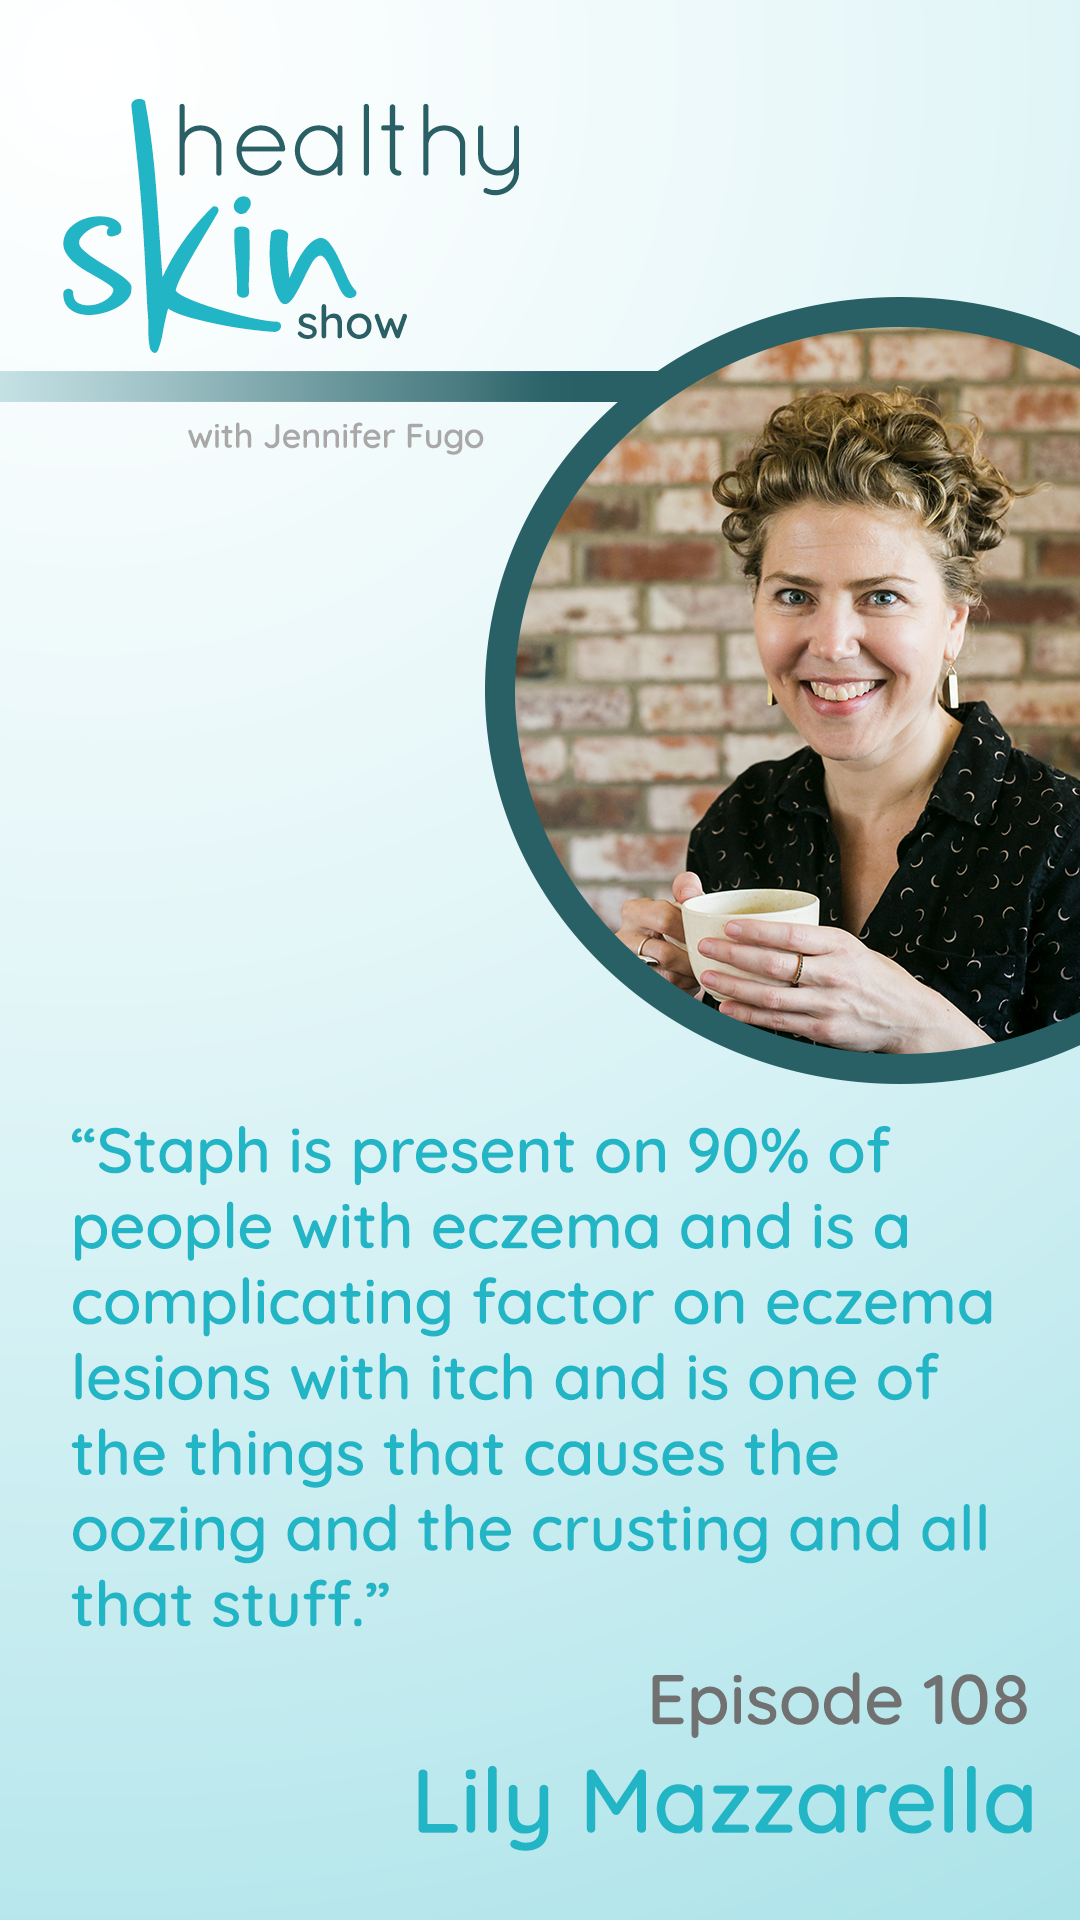 Staph is present on 90% of people with eczema and is a complicating factor on eczema lesions with itch and is one of the things that causes the oozing and the crusting and all that stuff.